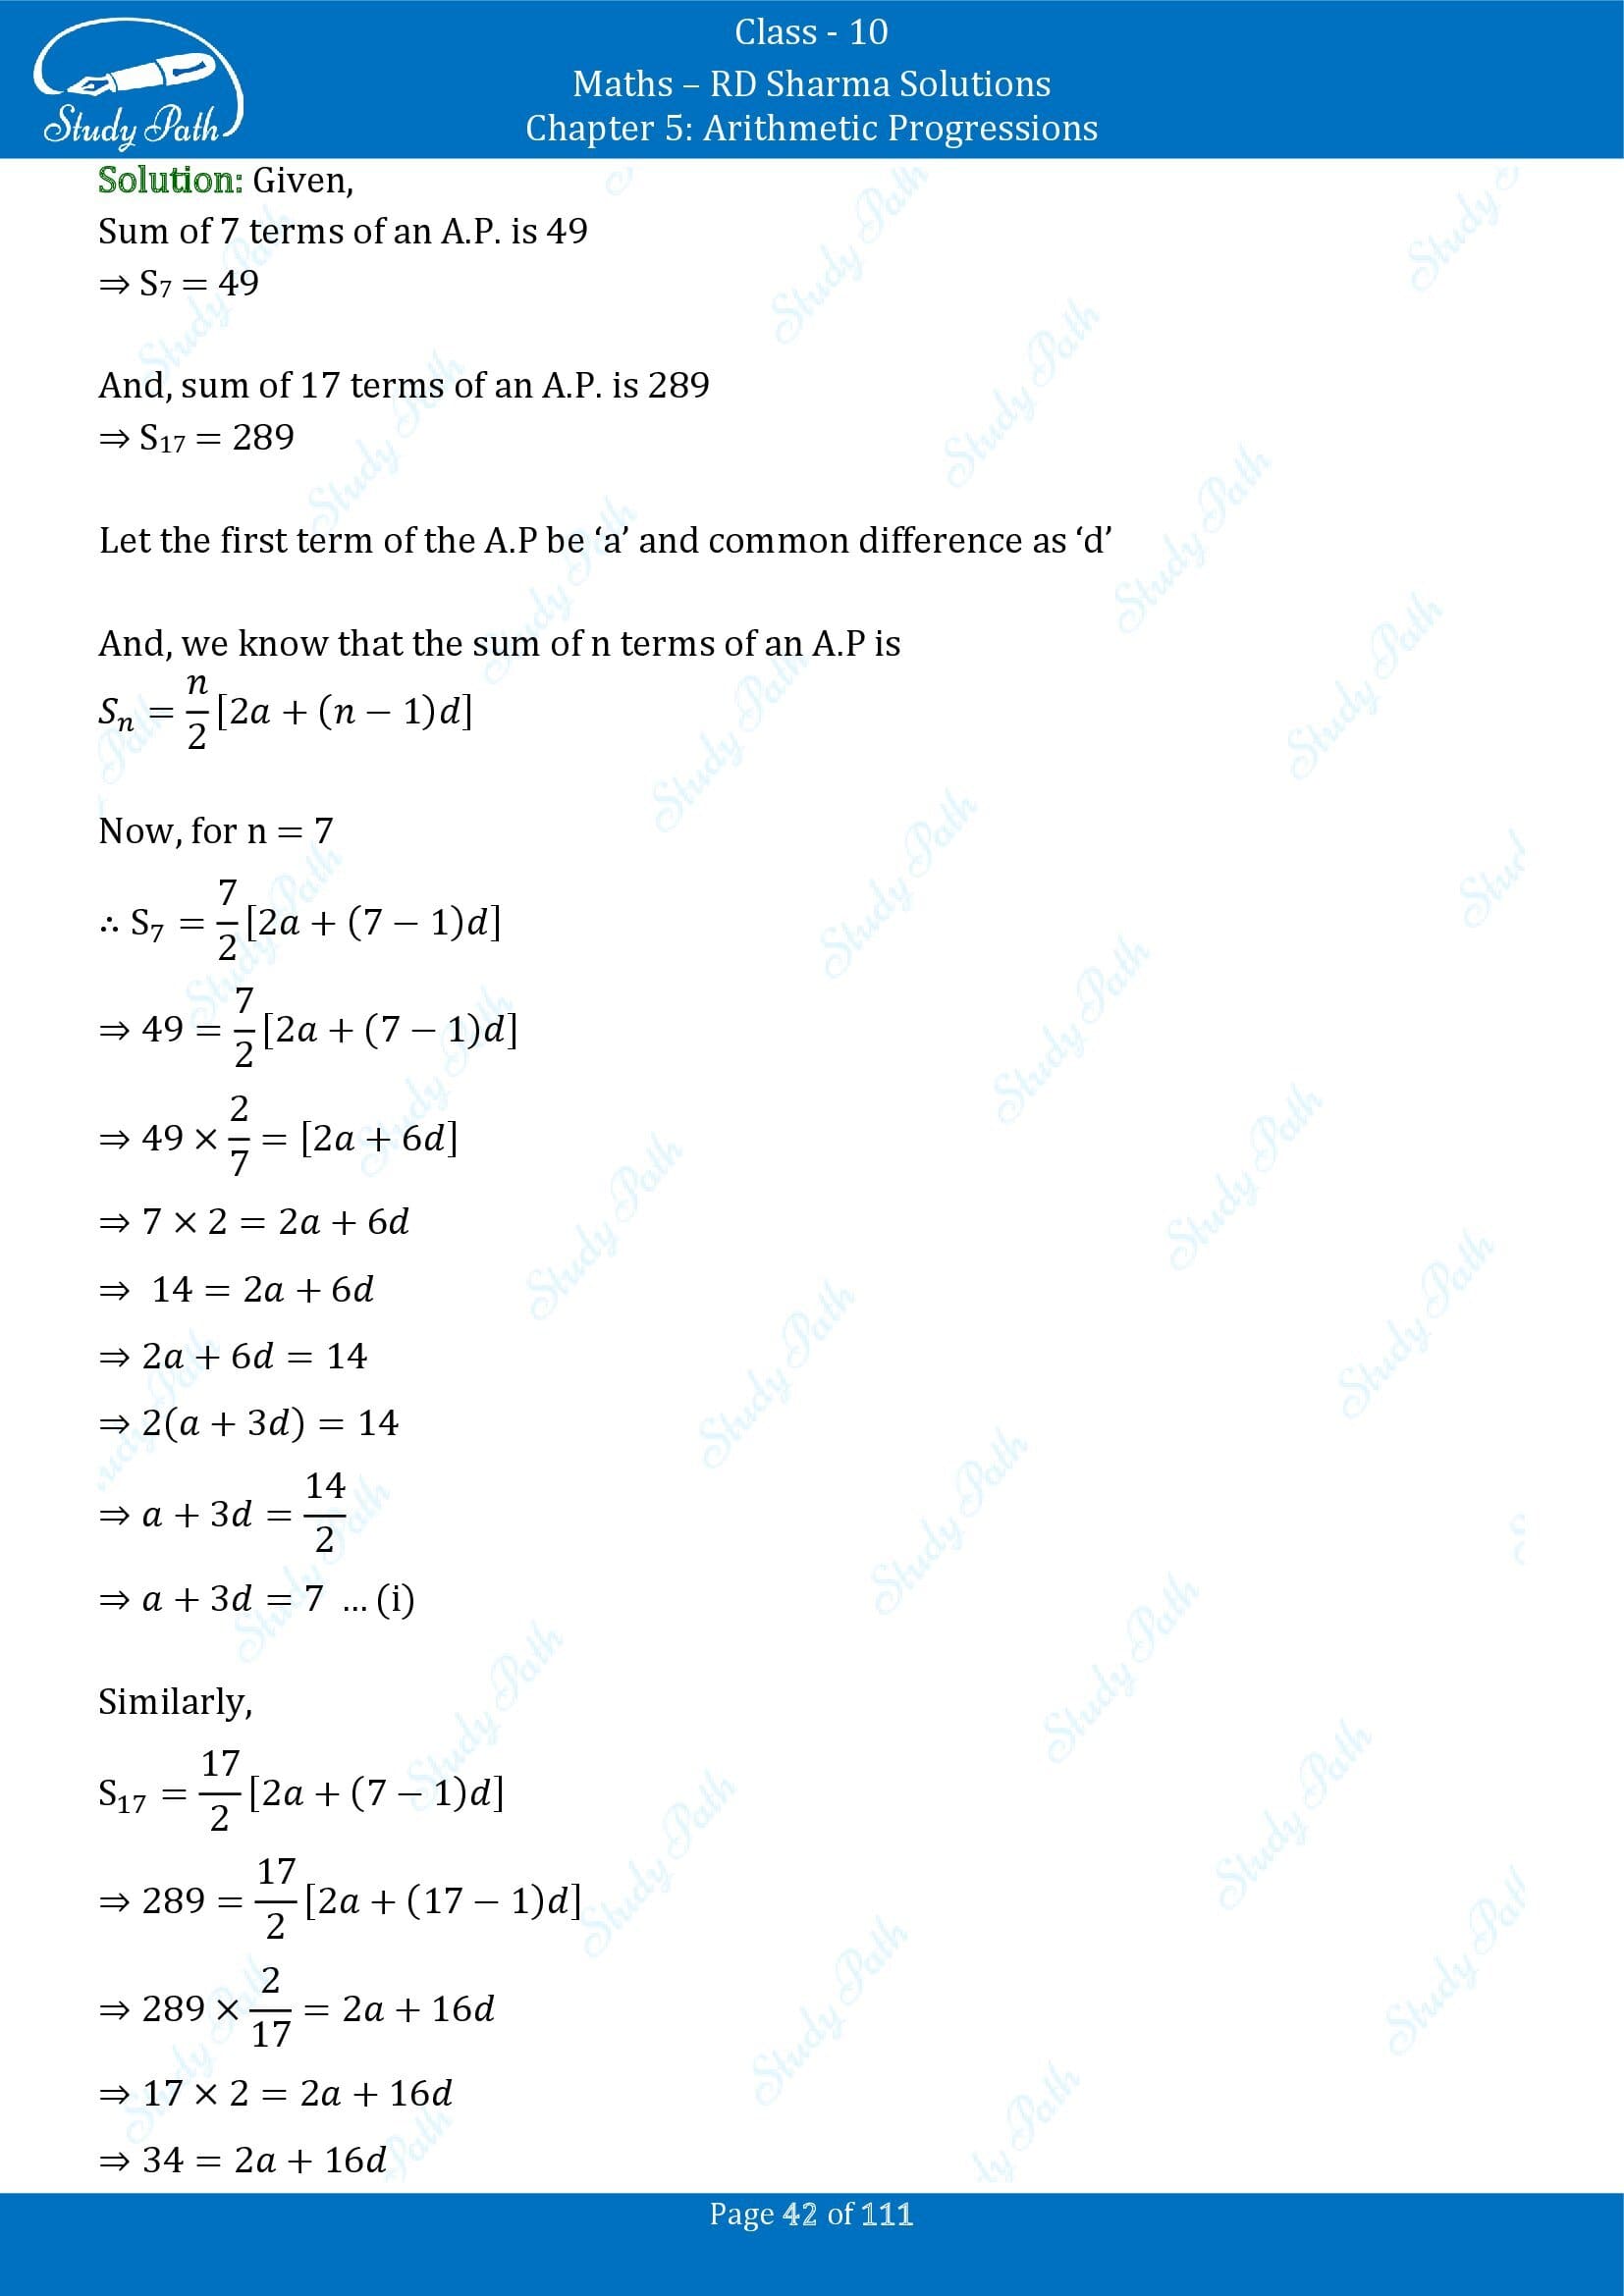 RD Sharma Solutions Class 10 Chapter 5 Arithmetic Progressions Exercise 5.6 00042